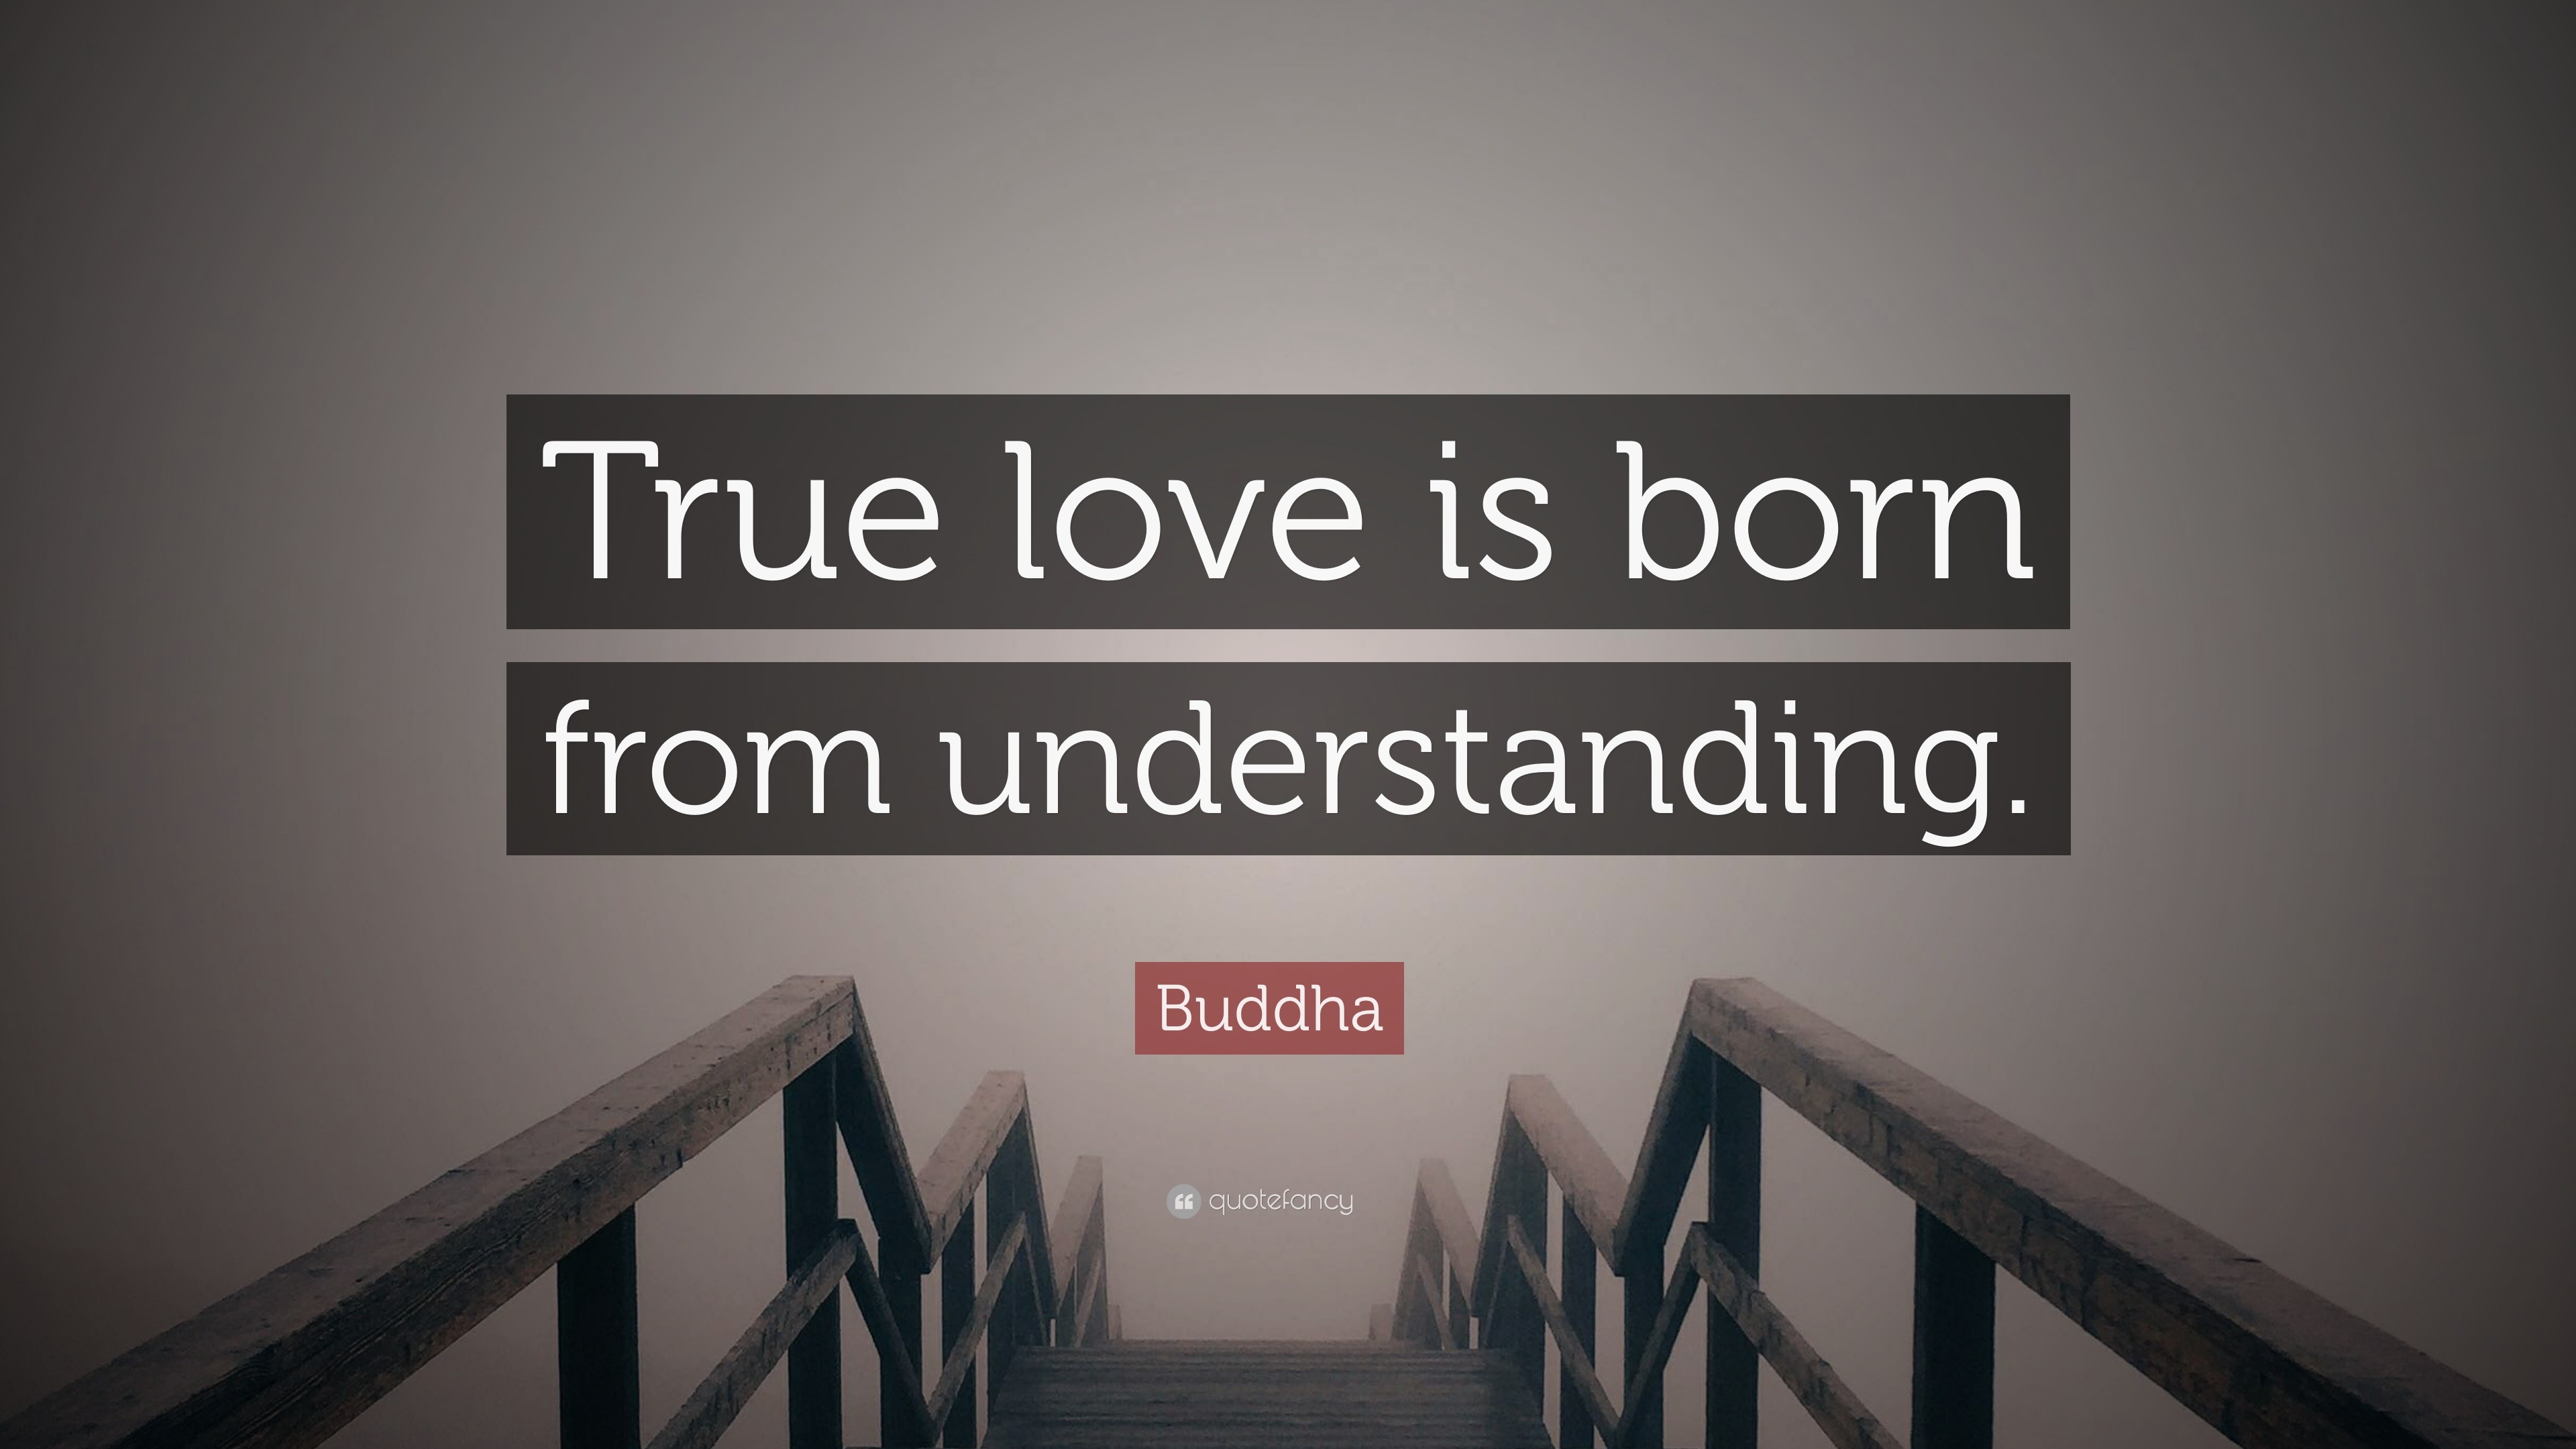 Buddha Quote “True love is born from understanding ”